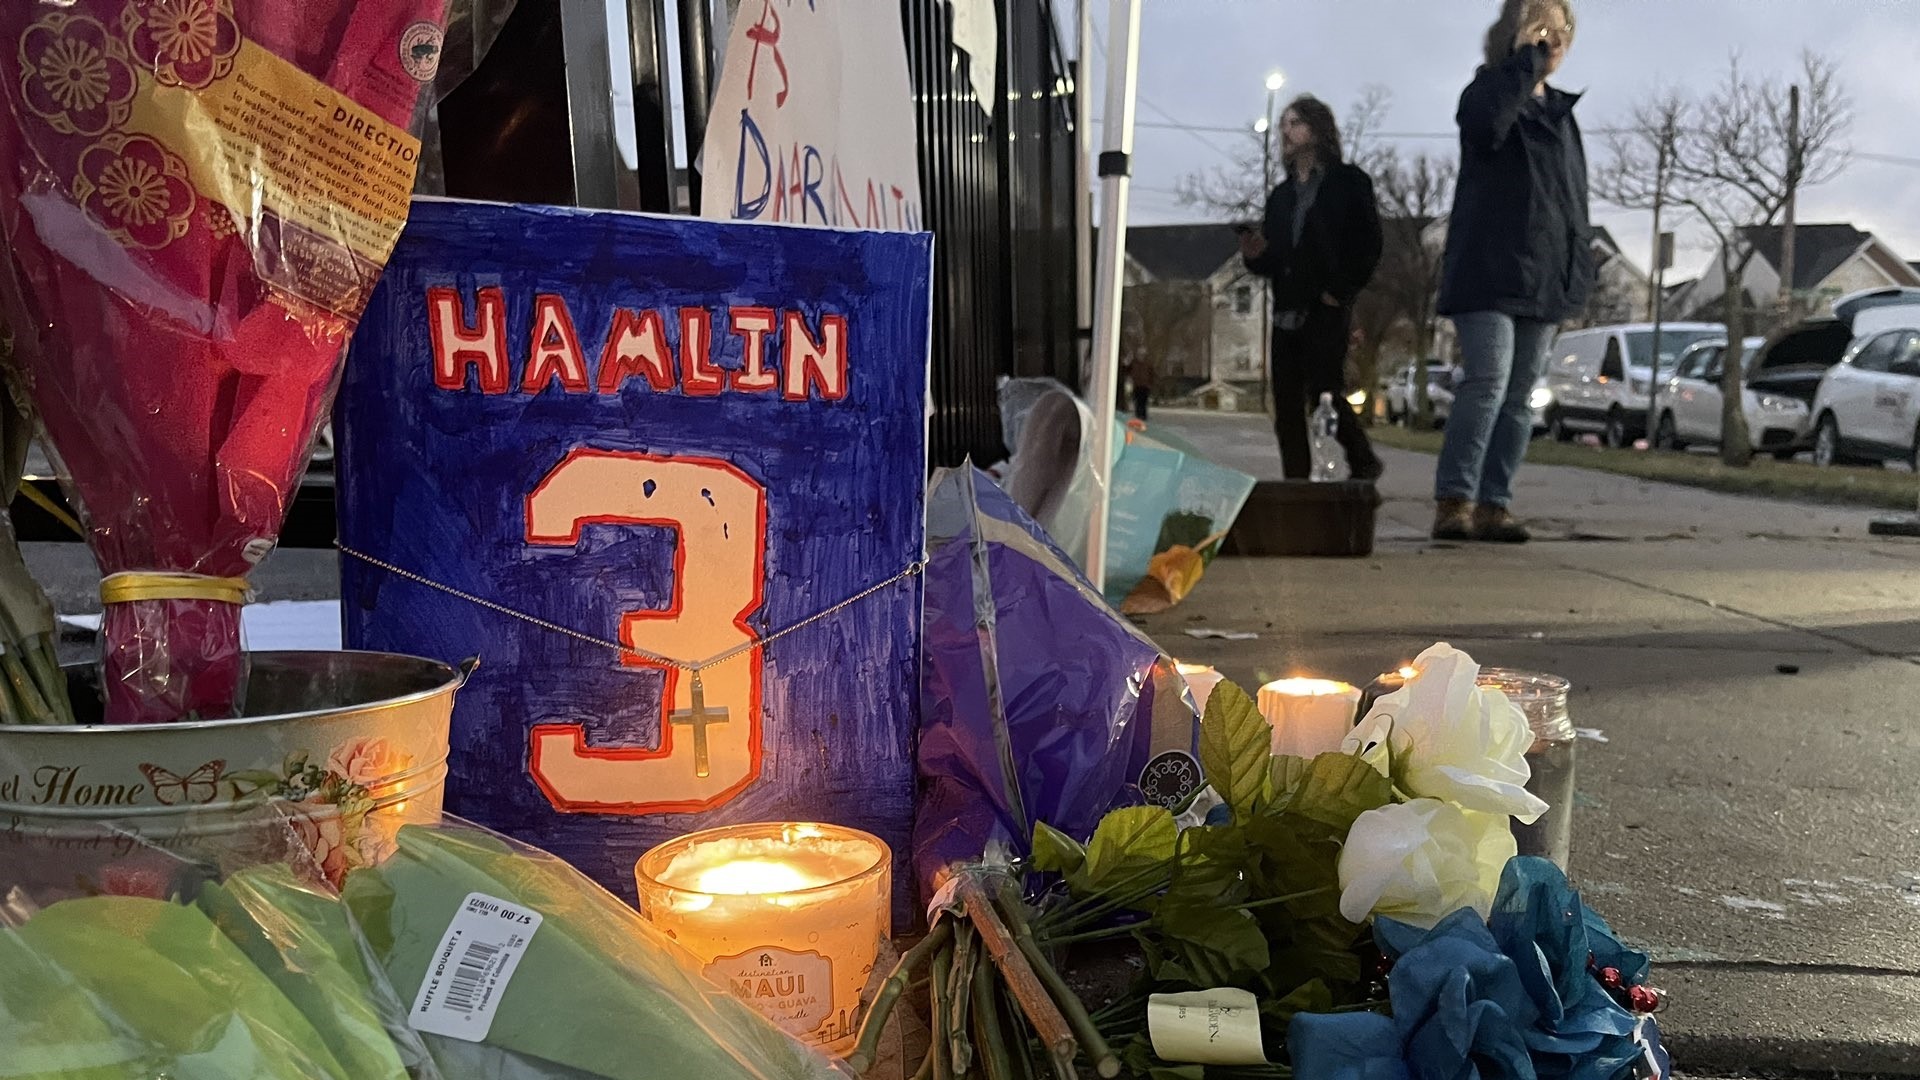 theScore - The outpouring of support for Damar Hamlin has been